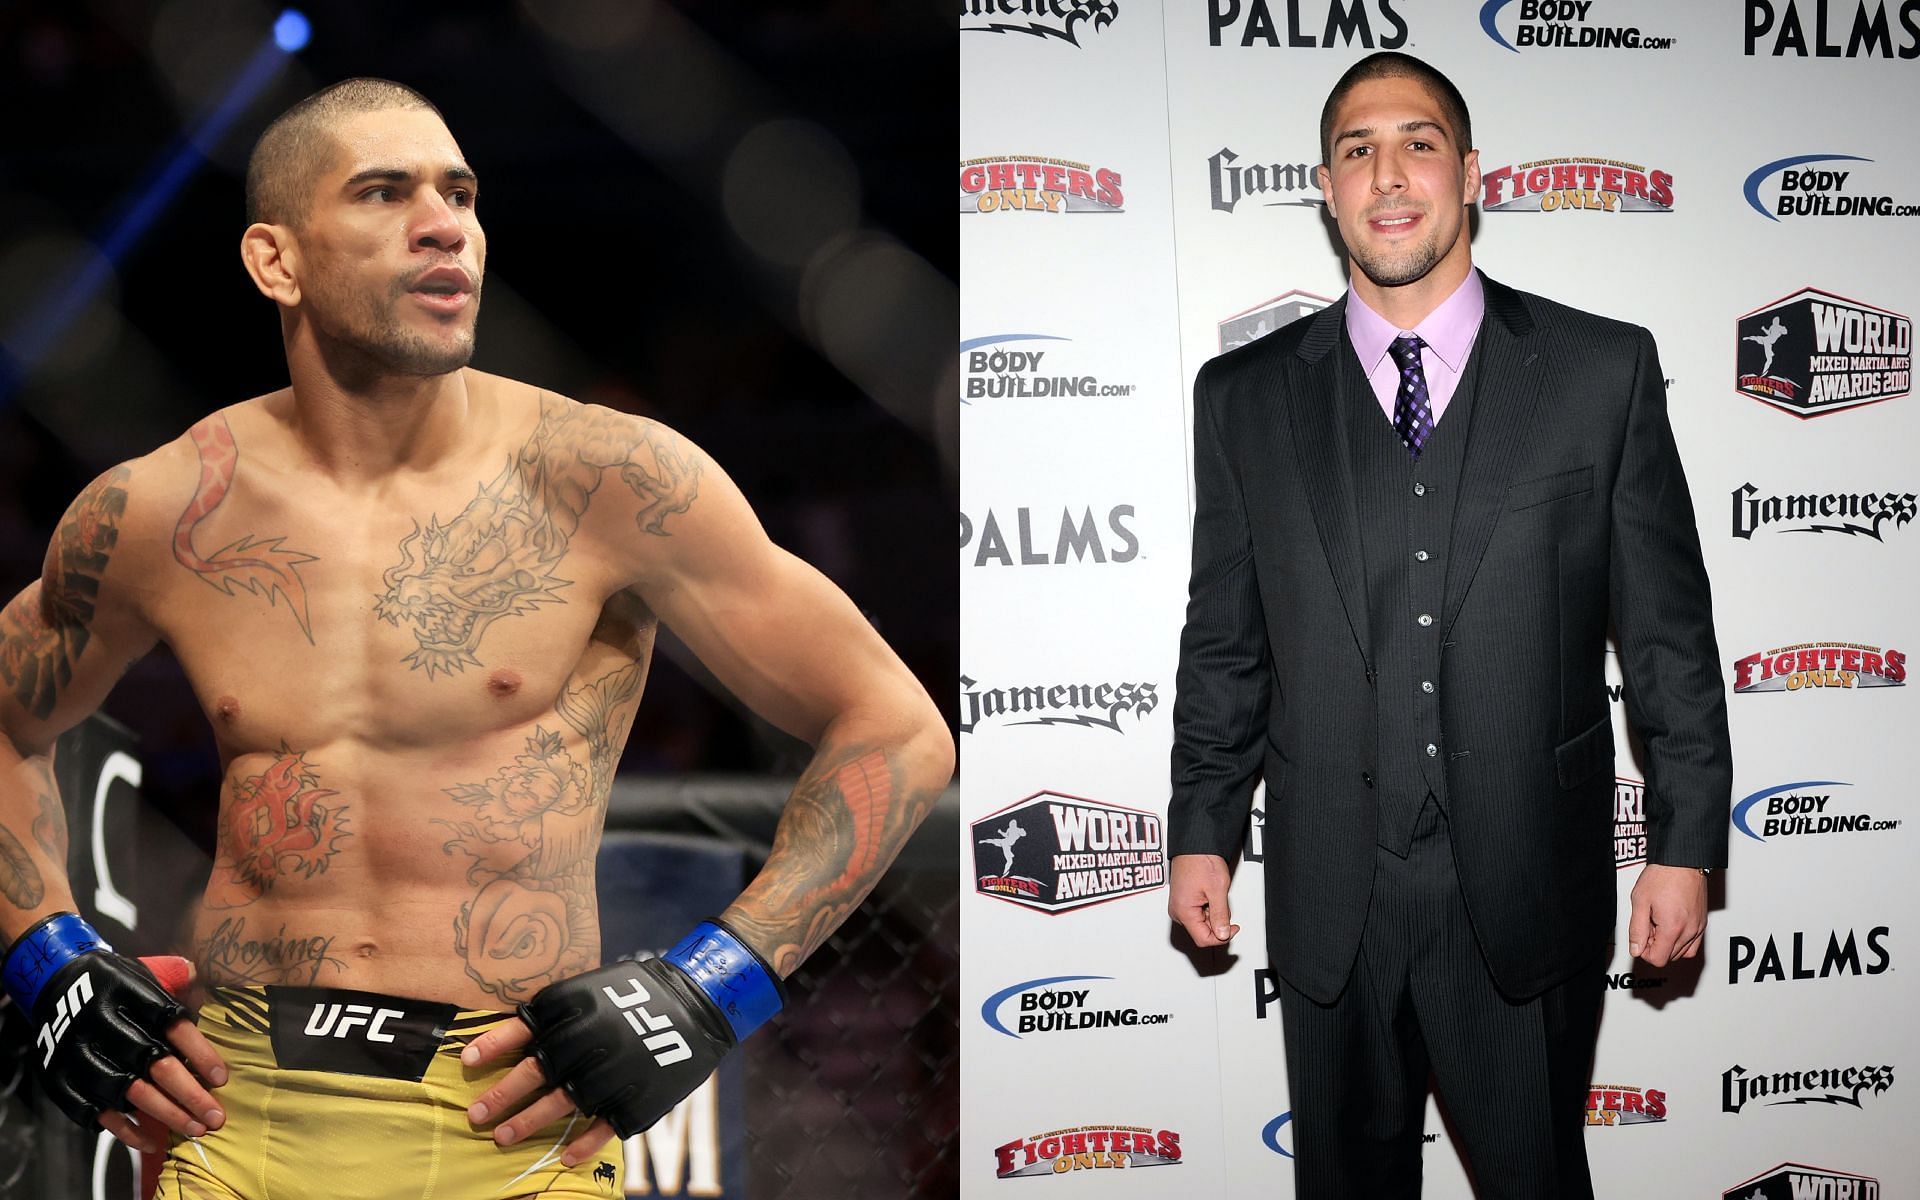 Brendan Schaub (right) and Alex Pereira (left) [Image Courtesy: Getty Images]